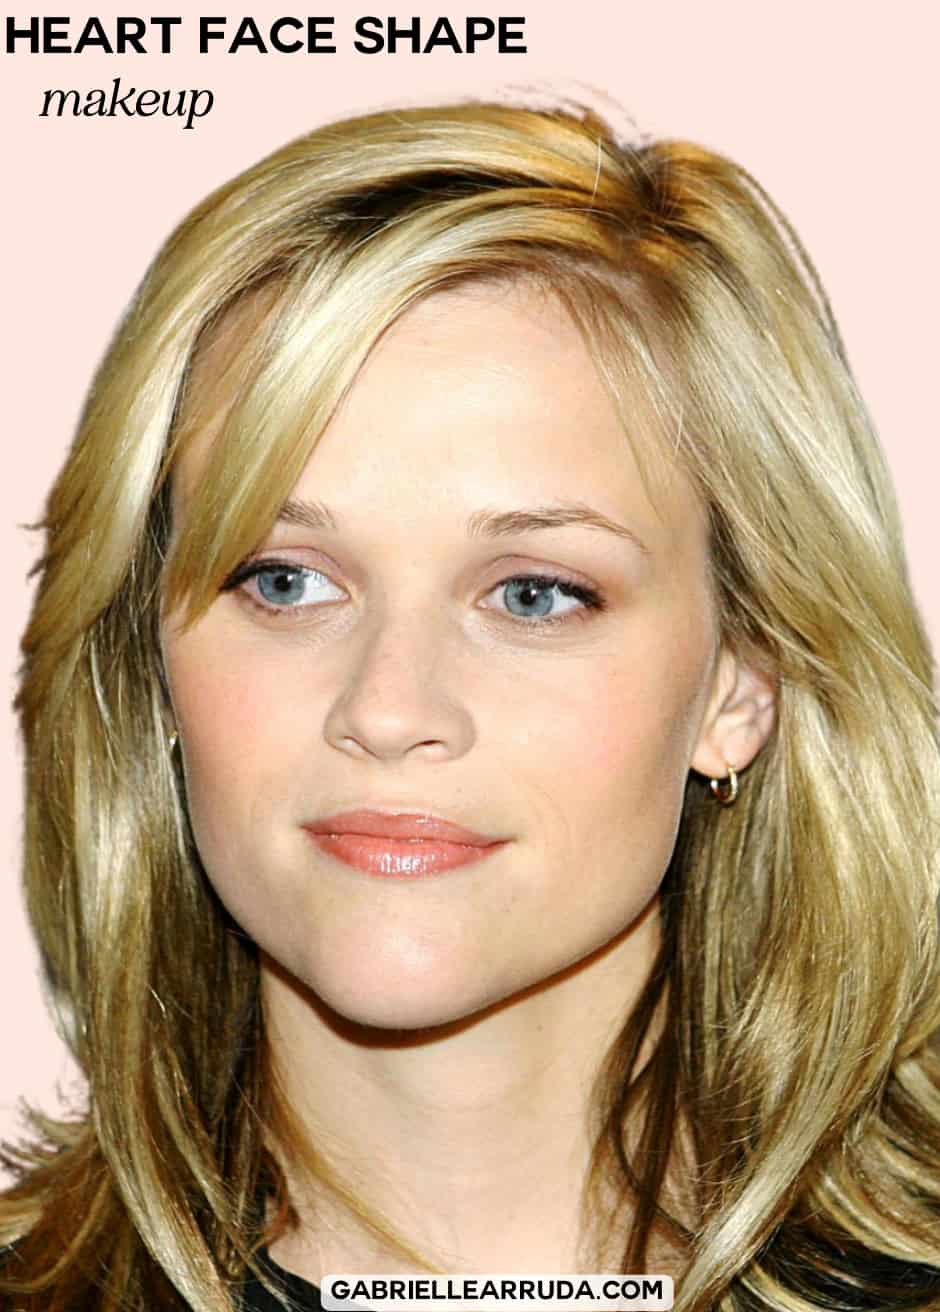 reese witherspoon face makeup example